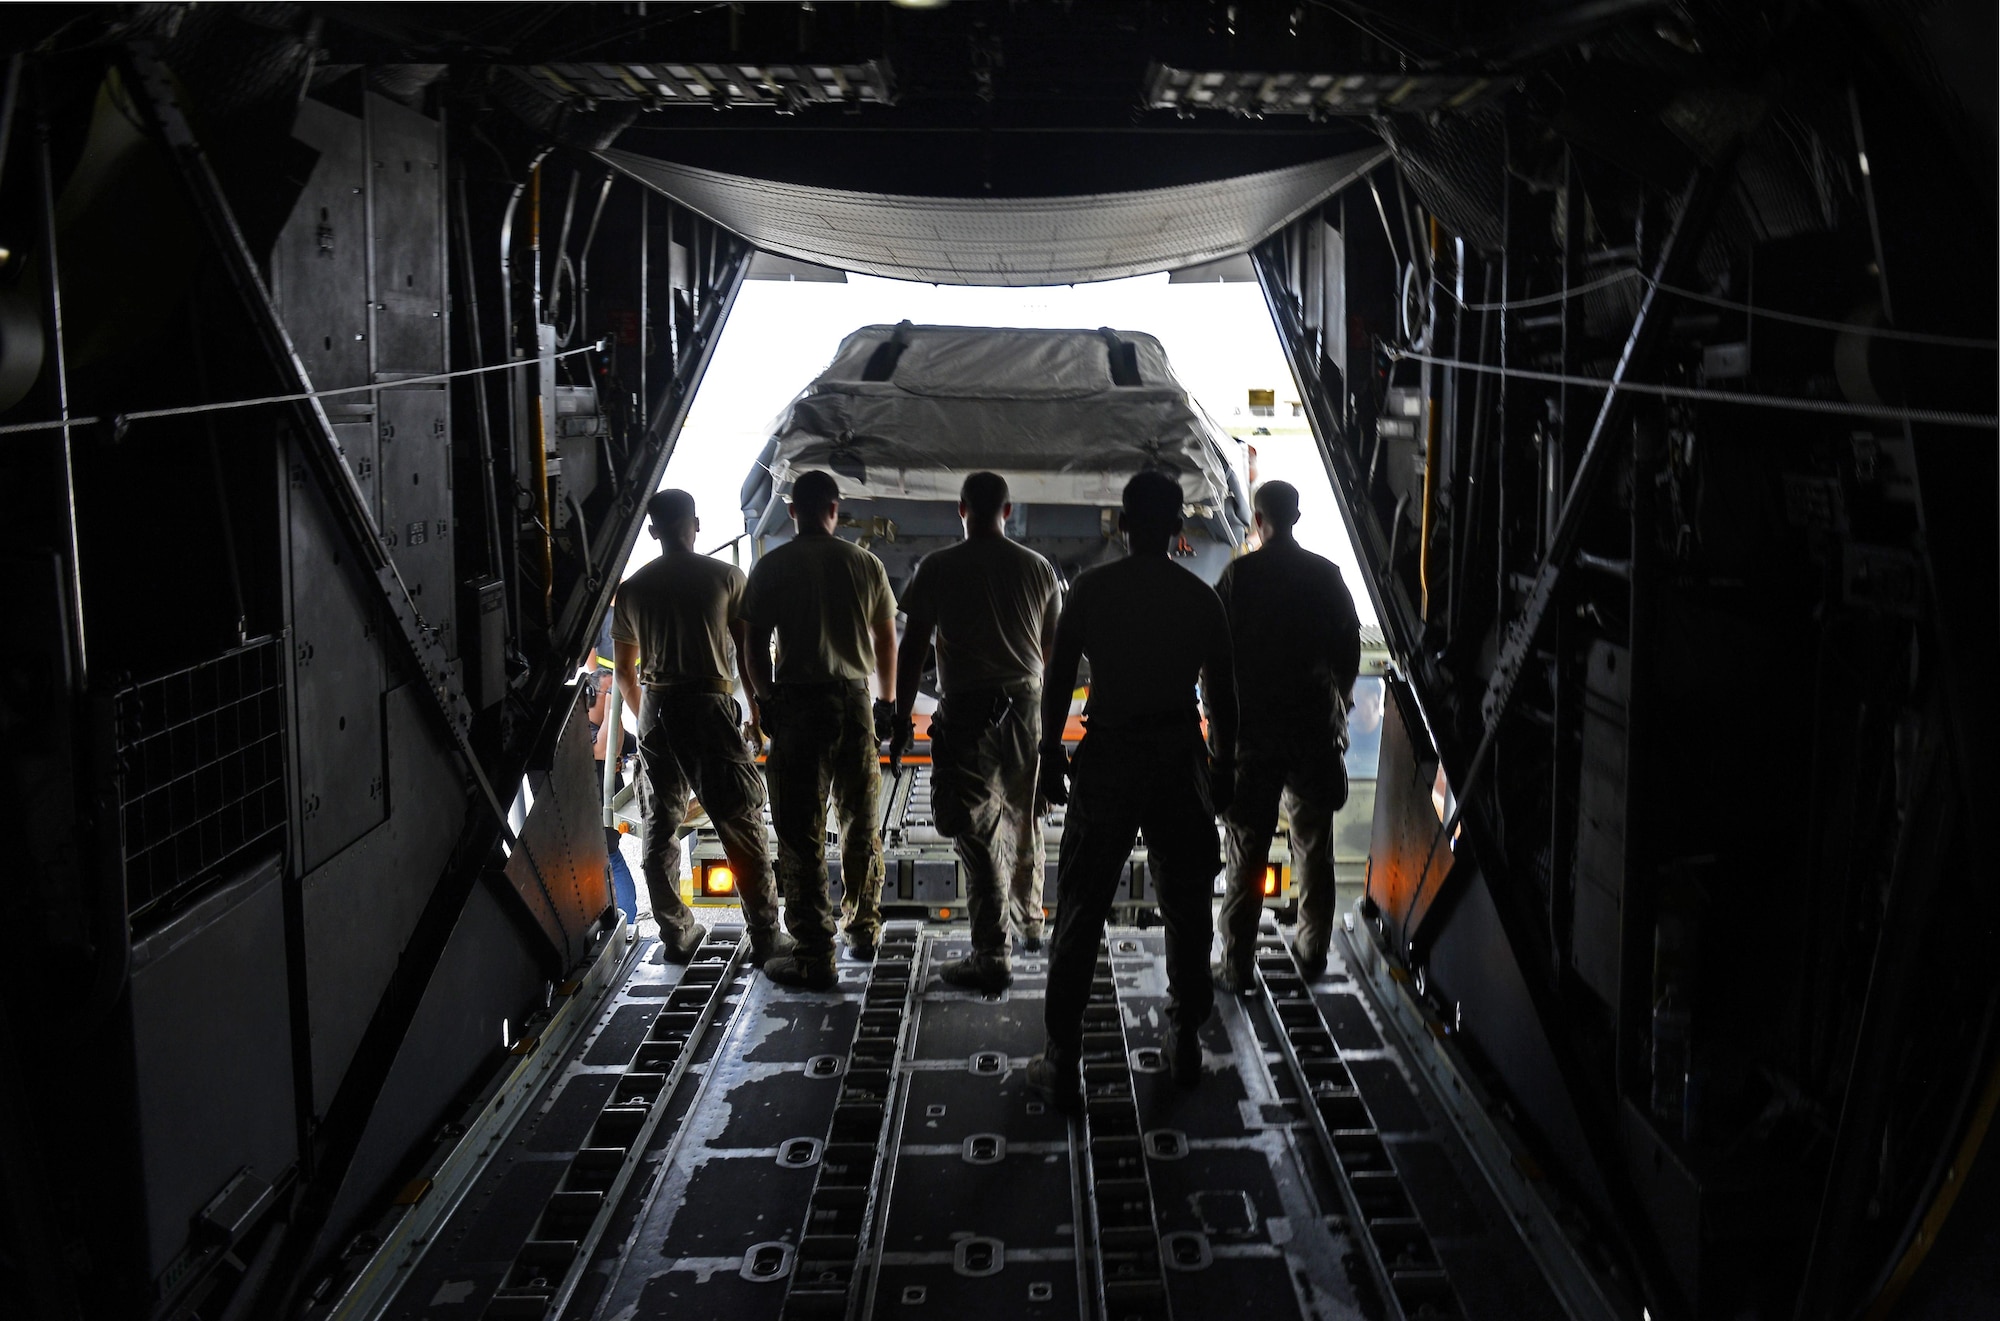 A team of MC-130 Combat Talon II loadmasters assigned to the 1st Special Operations Squadron stand ready to receive a load carrier approaching the aircraft during an exercise Sept. 18, 2015, at Andersen Air Force Base, Guam. The MC-130H was part of a dissimilar formation with an MC-130J that completed a Maritime Craft Aerial Delivery System airdrop.  This was the first time an MC-130J Commando II completed the MCADS airdrop in the Pacific.  (U.S. Air Force photo by Staff Sgt. Alexander Riedel)